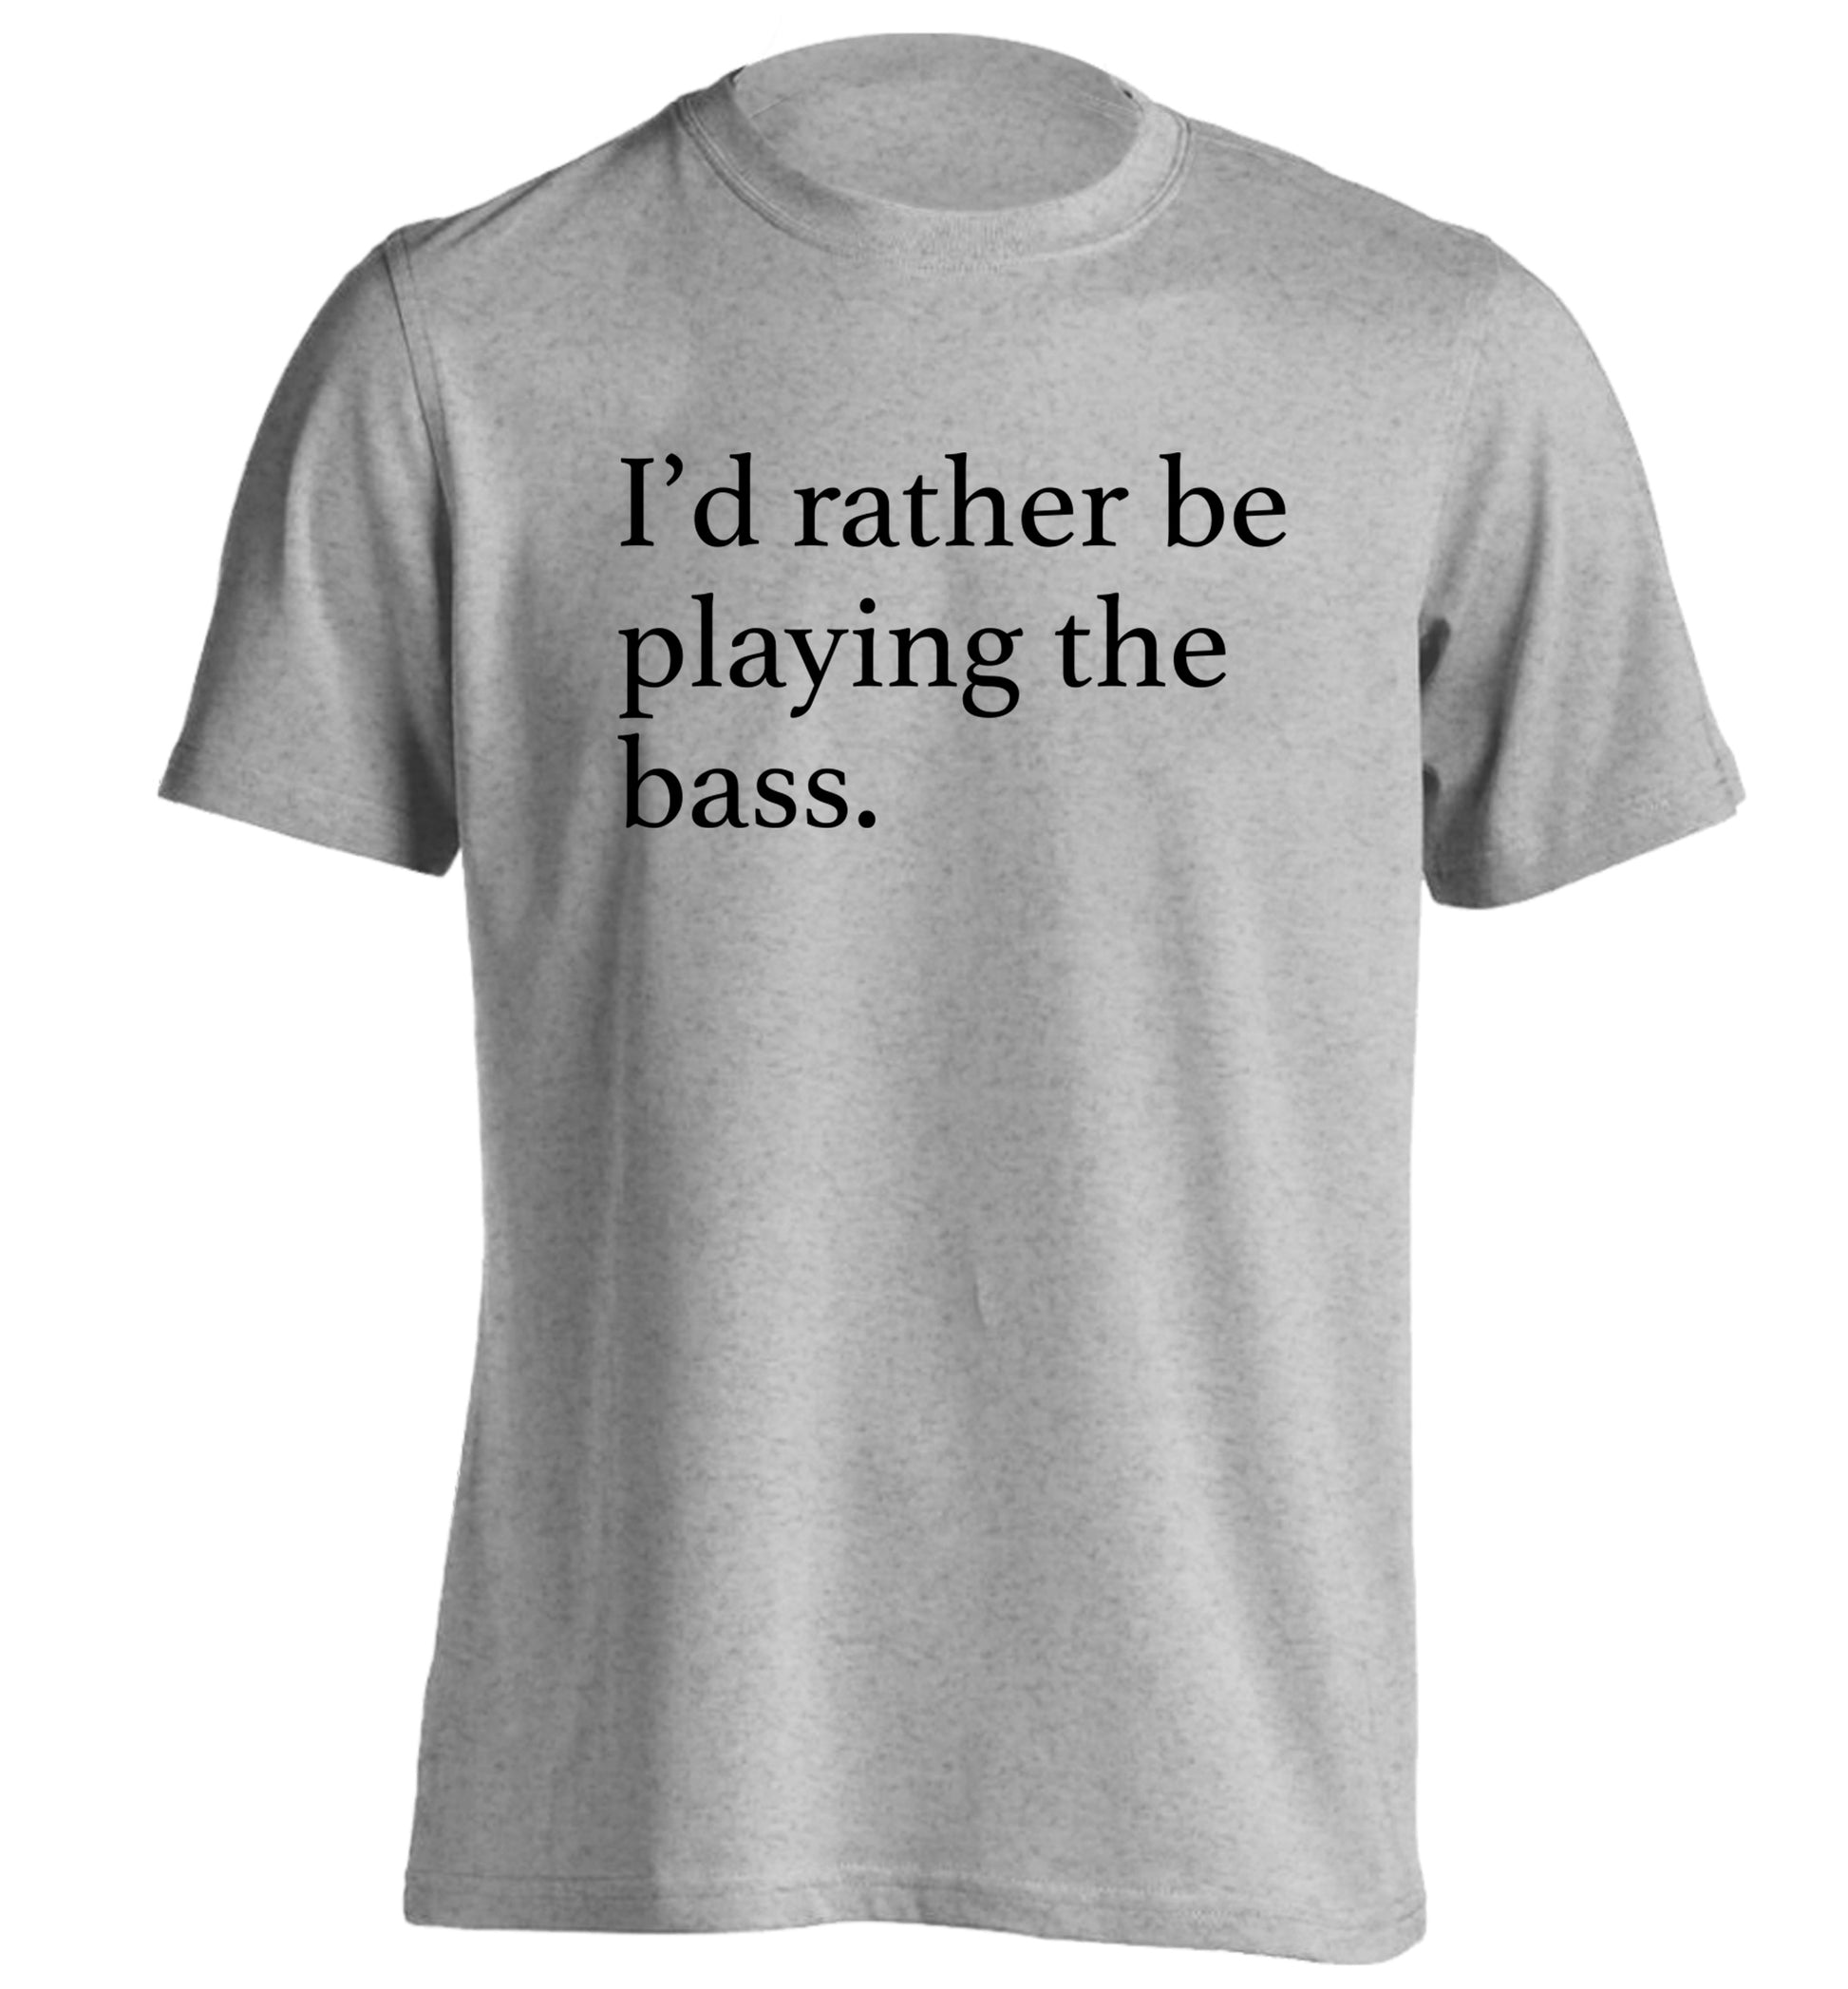 I'd rather by playing the bass adults unisex grey Tshirt 2XL